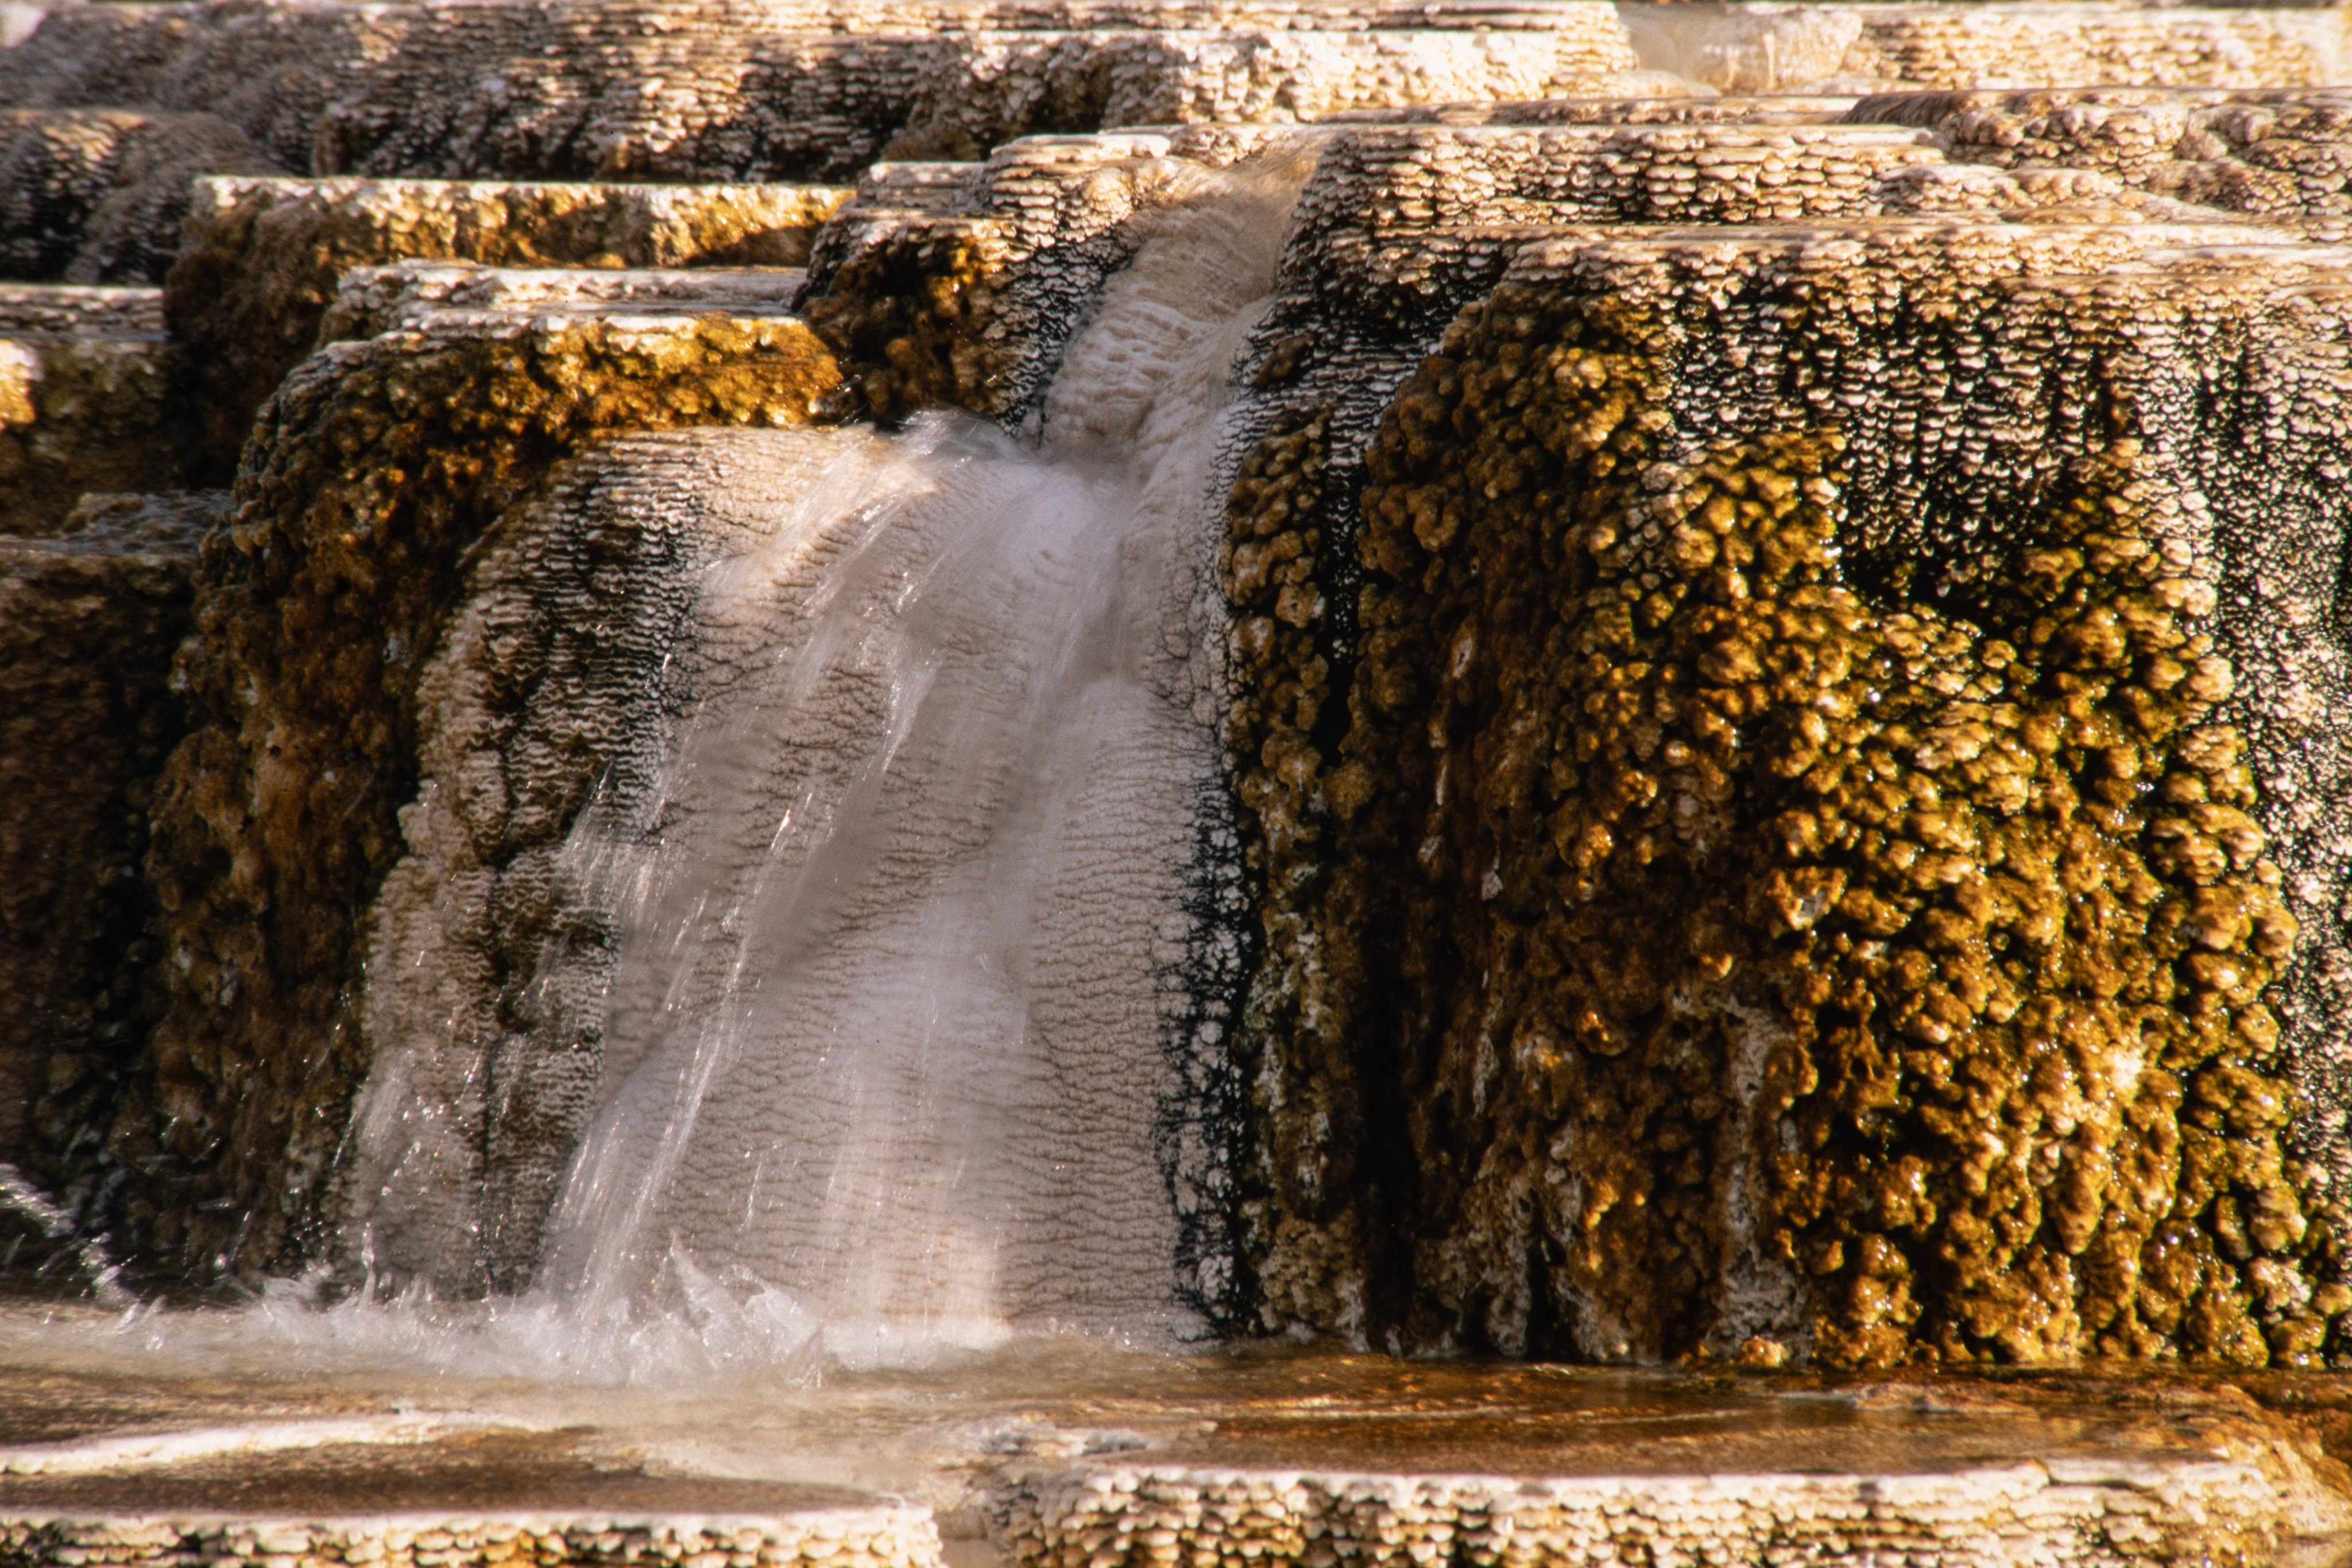 Colorful mineral formations in the Lower Terraces of Mammoth Hot Springs in Yellowstone National Park in Wyoming, USA.